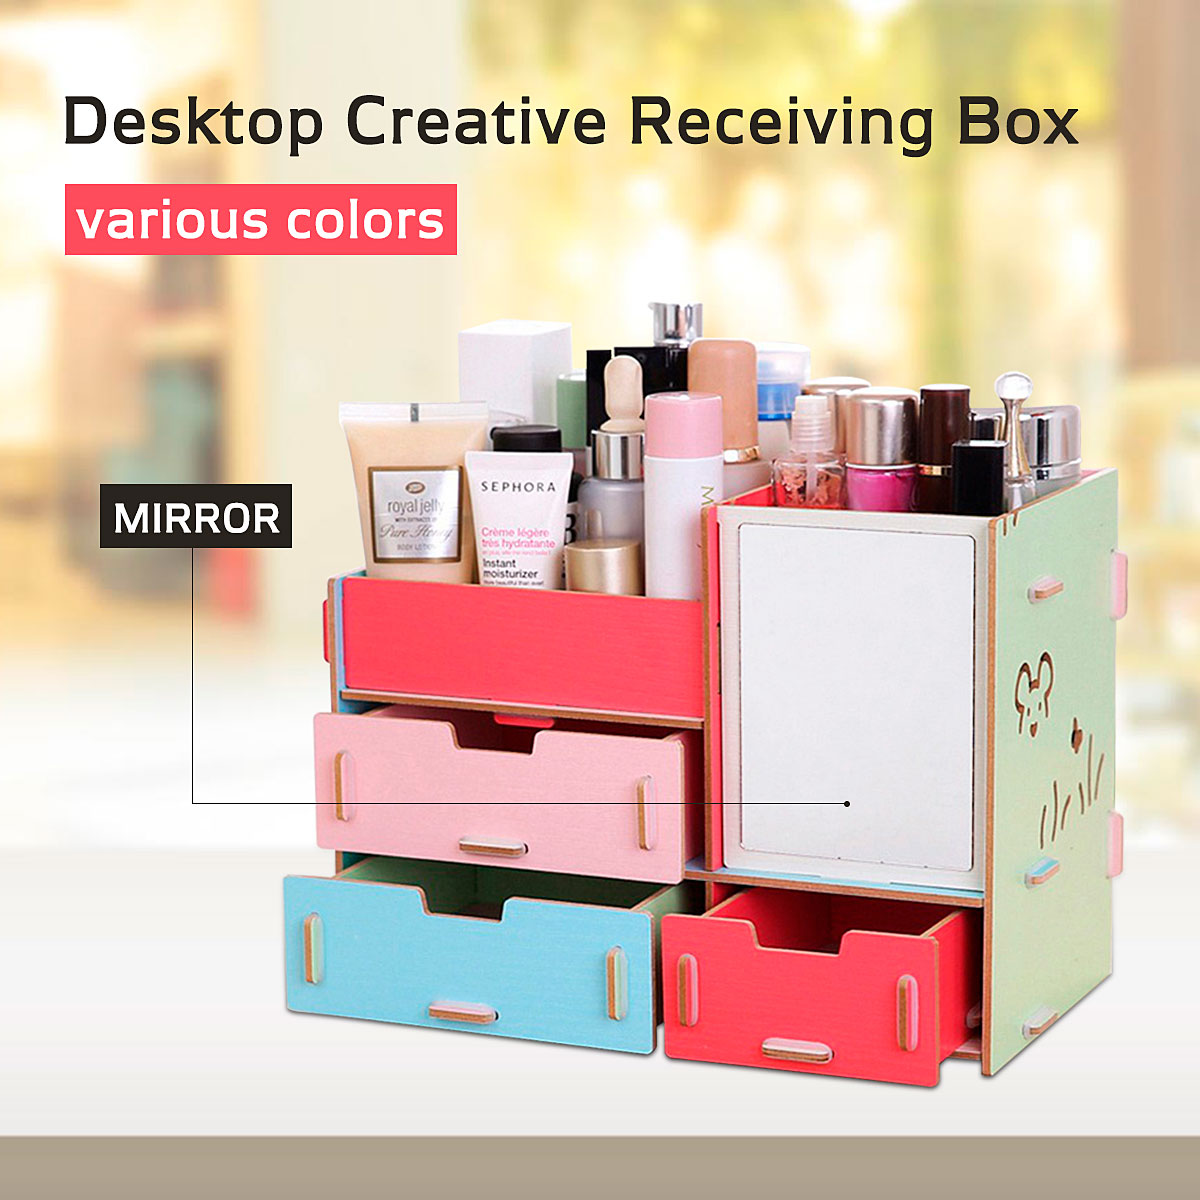 Desktop-Storage-Case-Wooden-Cosmetic-Drawer-Makeup-Organizer-Makeup-Storage-Box-Container-for-Home-O-1547357-1